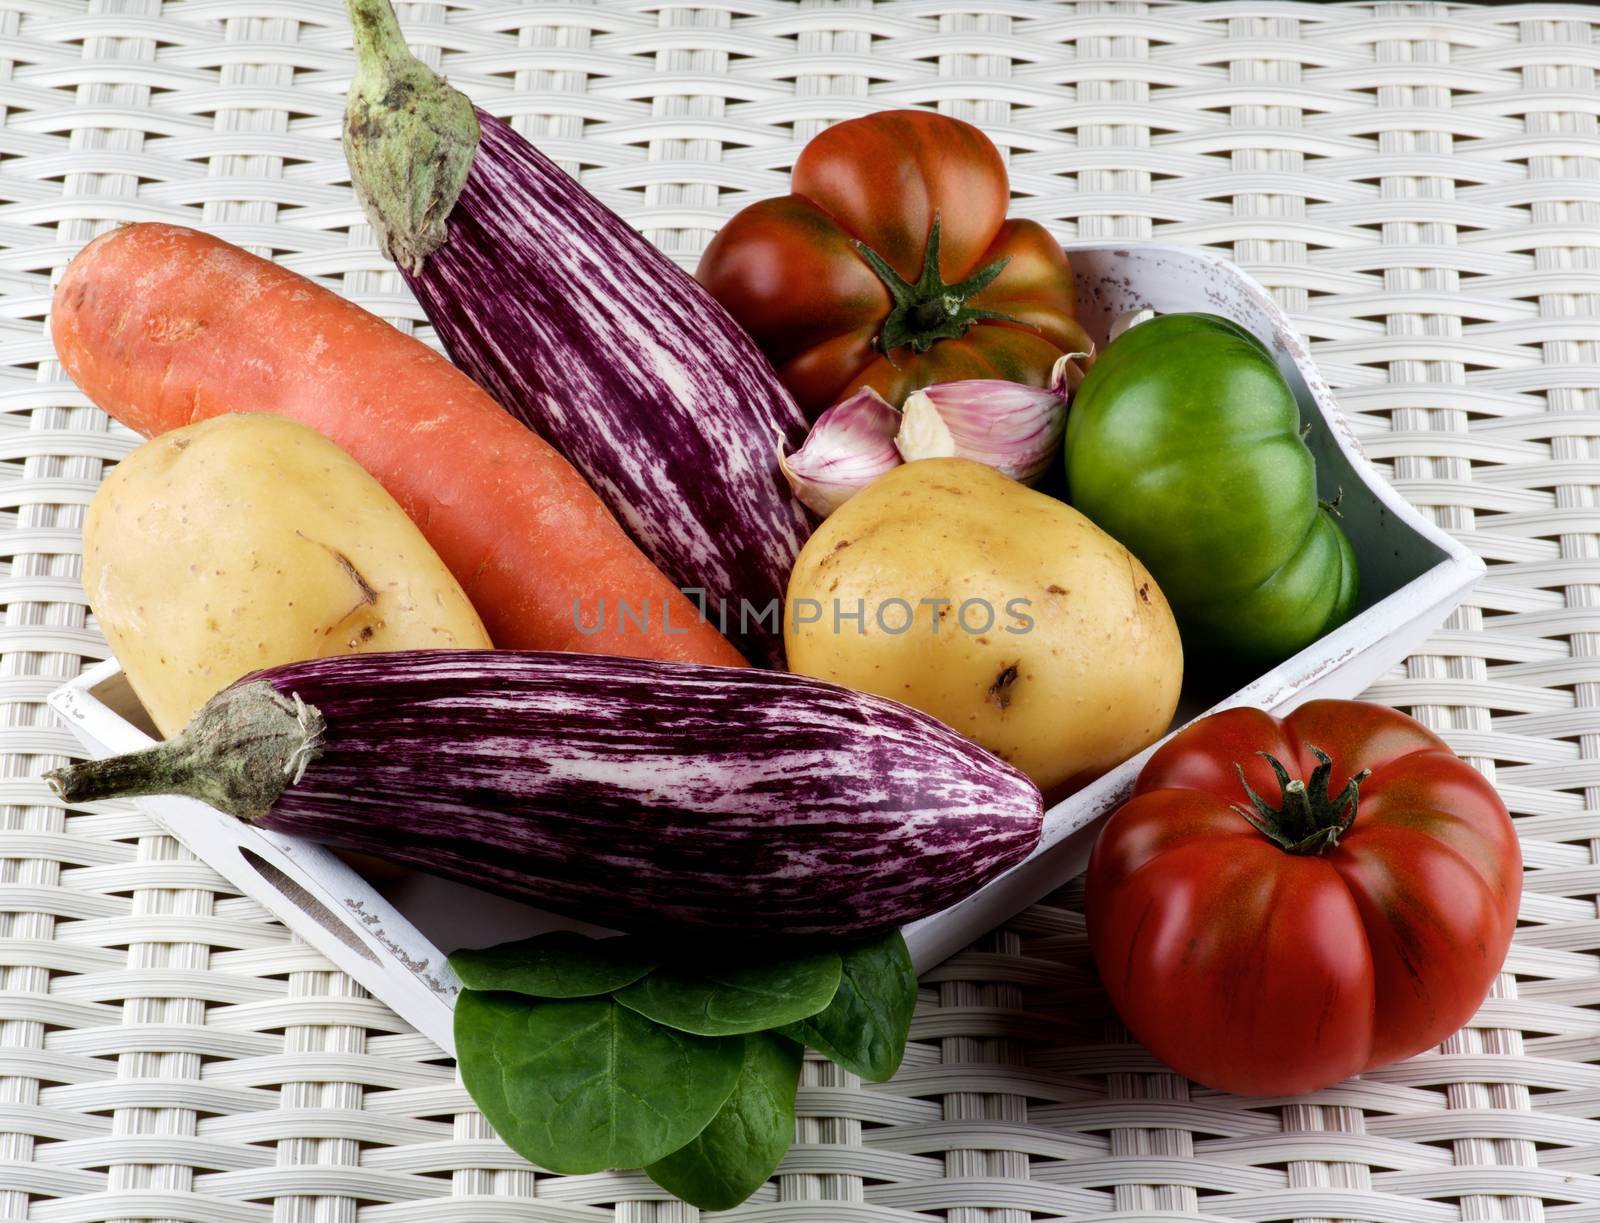 Arrangement of Fresh Raw Vegetables with Striped Eggplants, Potato, Carrot, Green and Red Tomatoes, and Garlic on Wooden Tray closeup on Wicker background